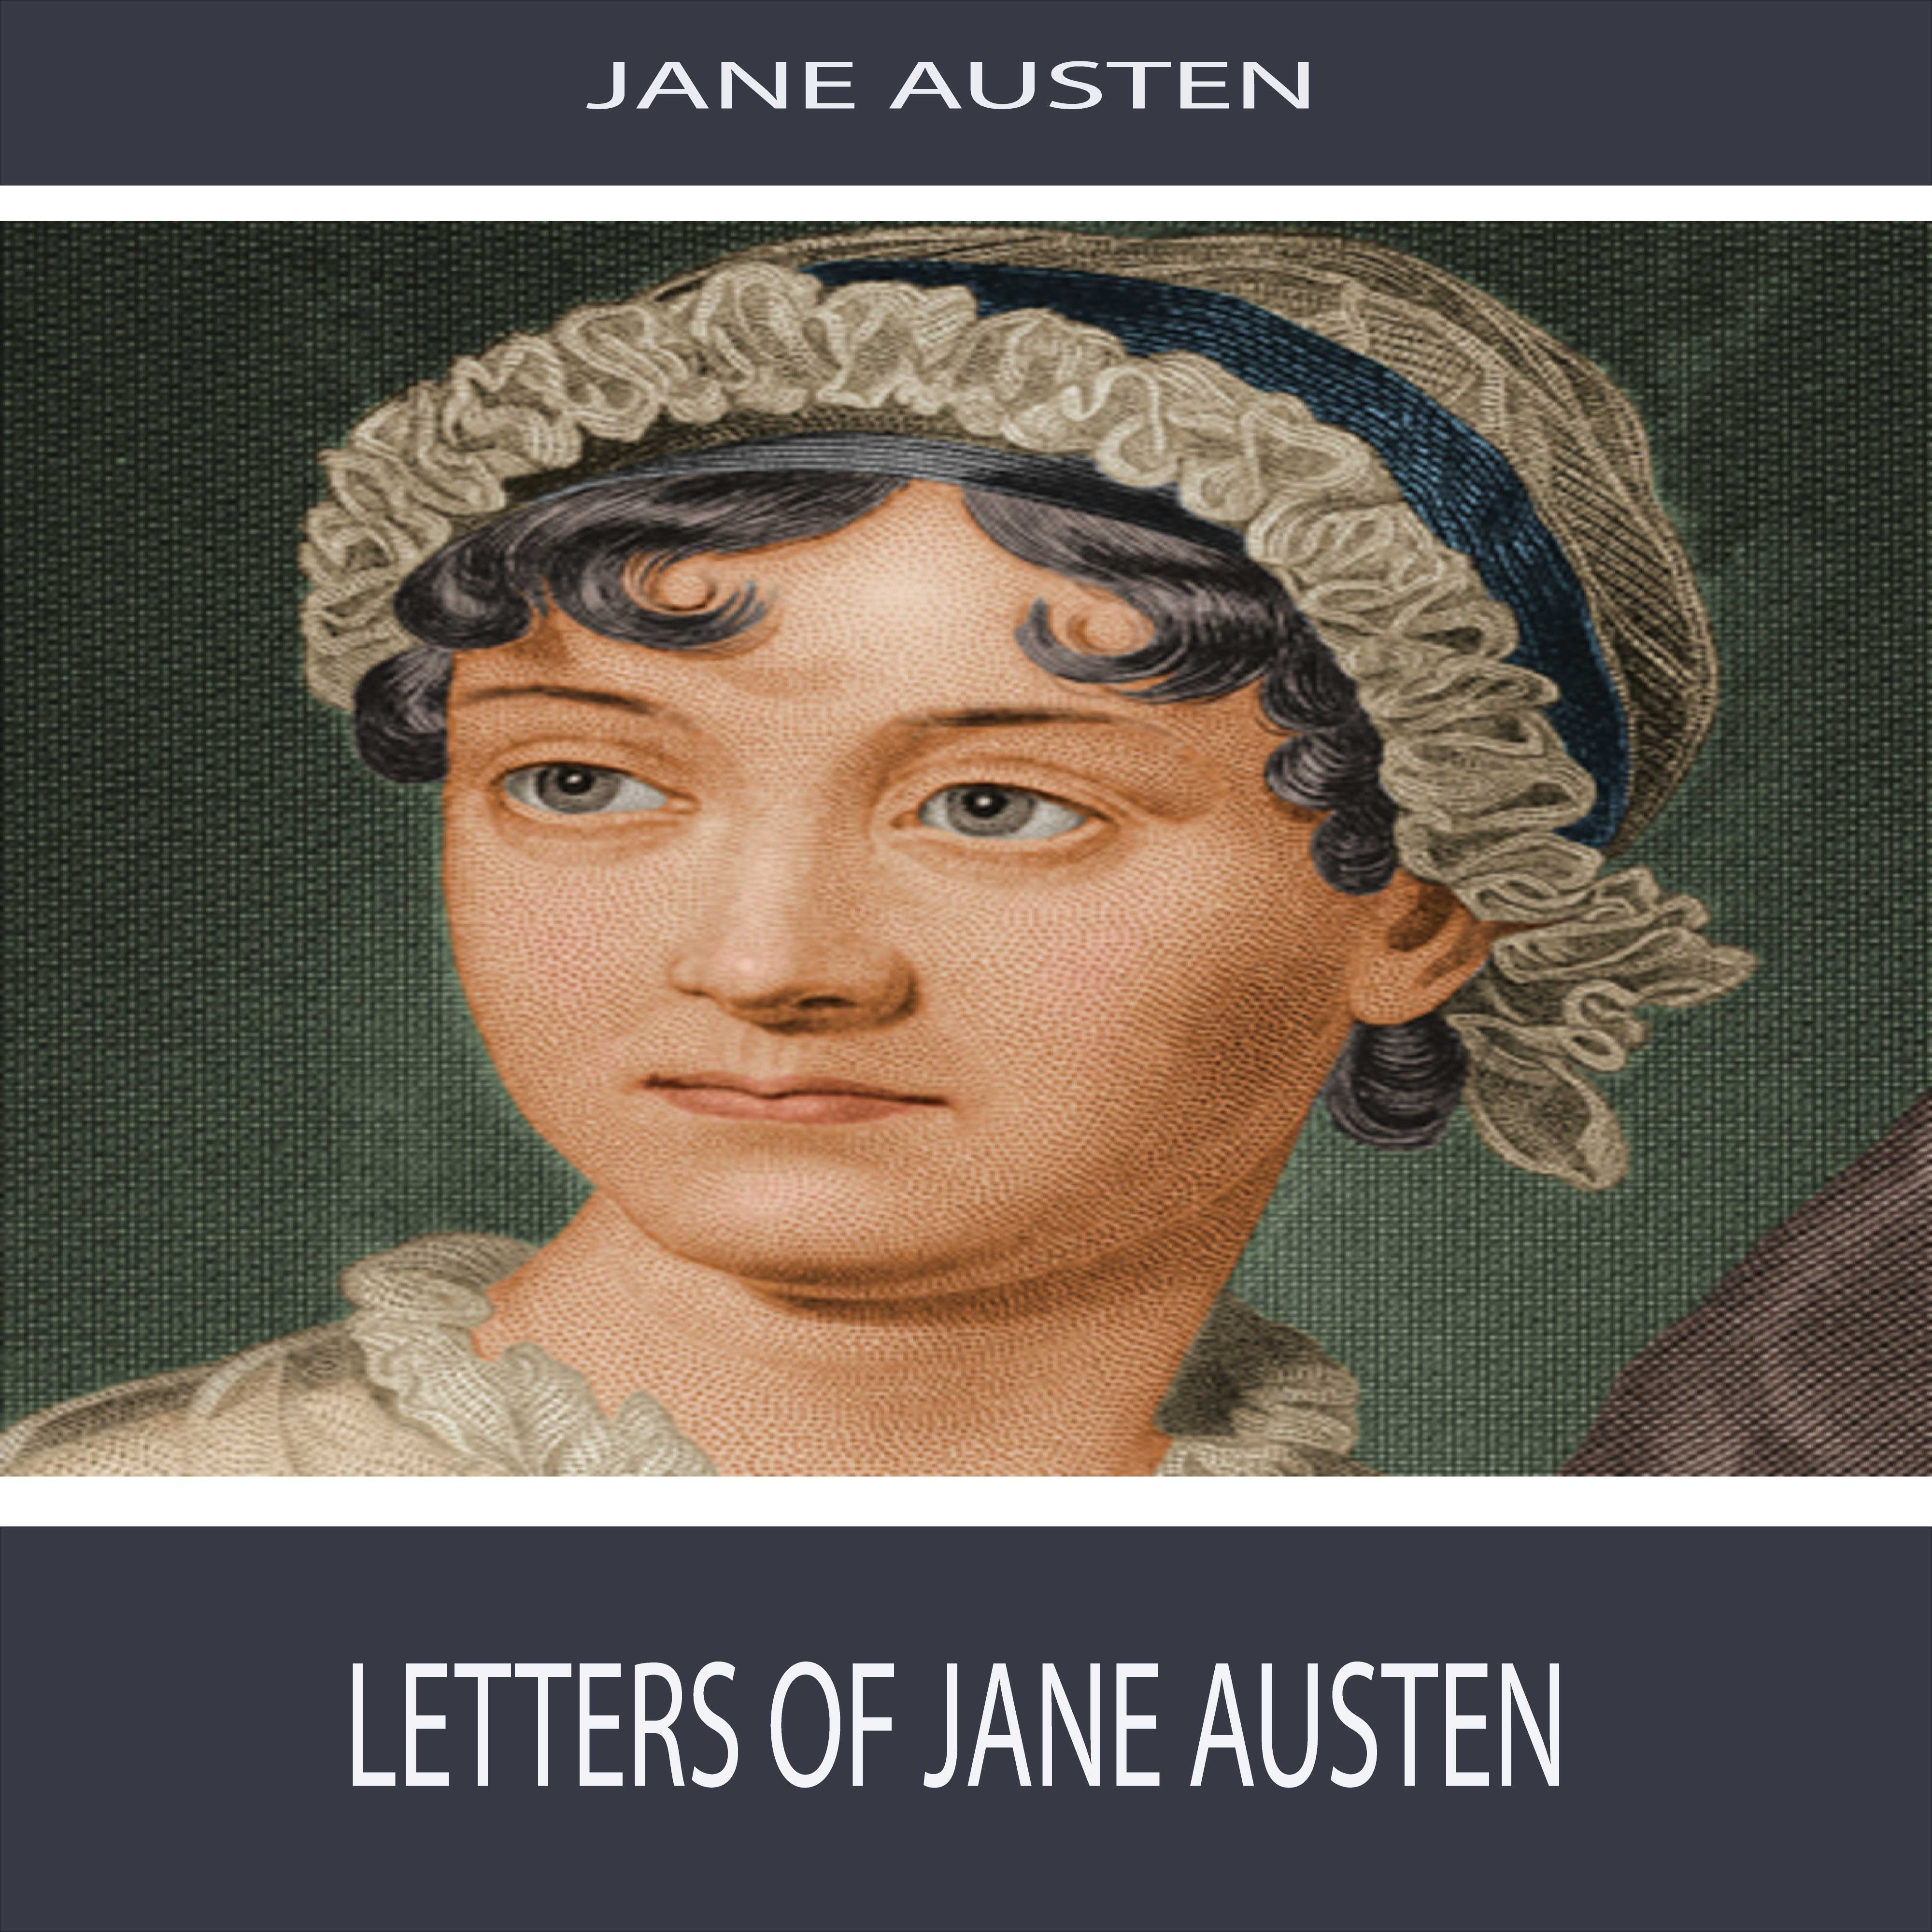 Letters of Jane Austen: Section 13